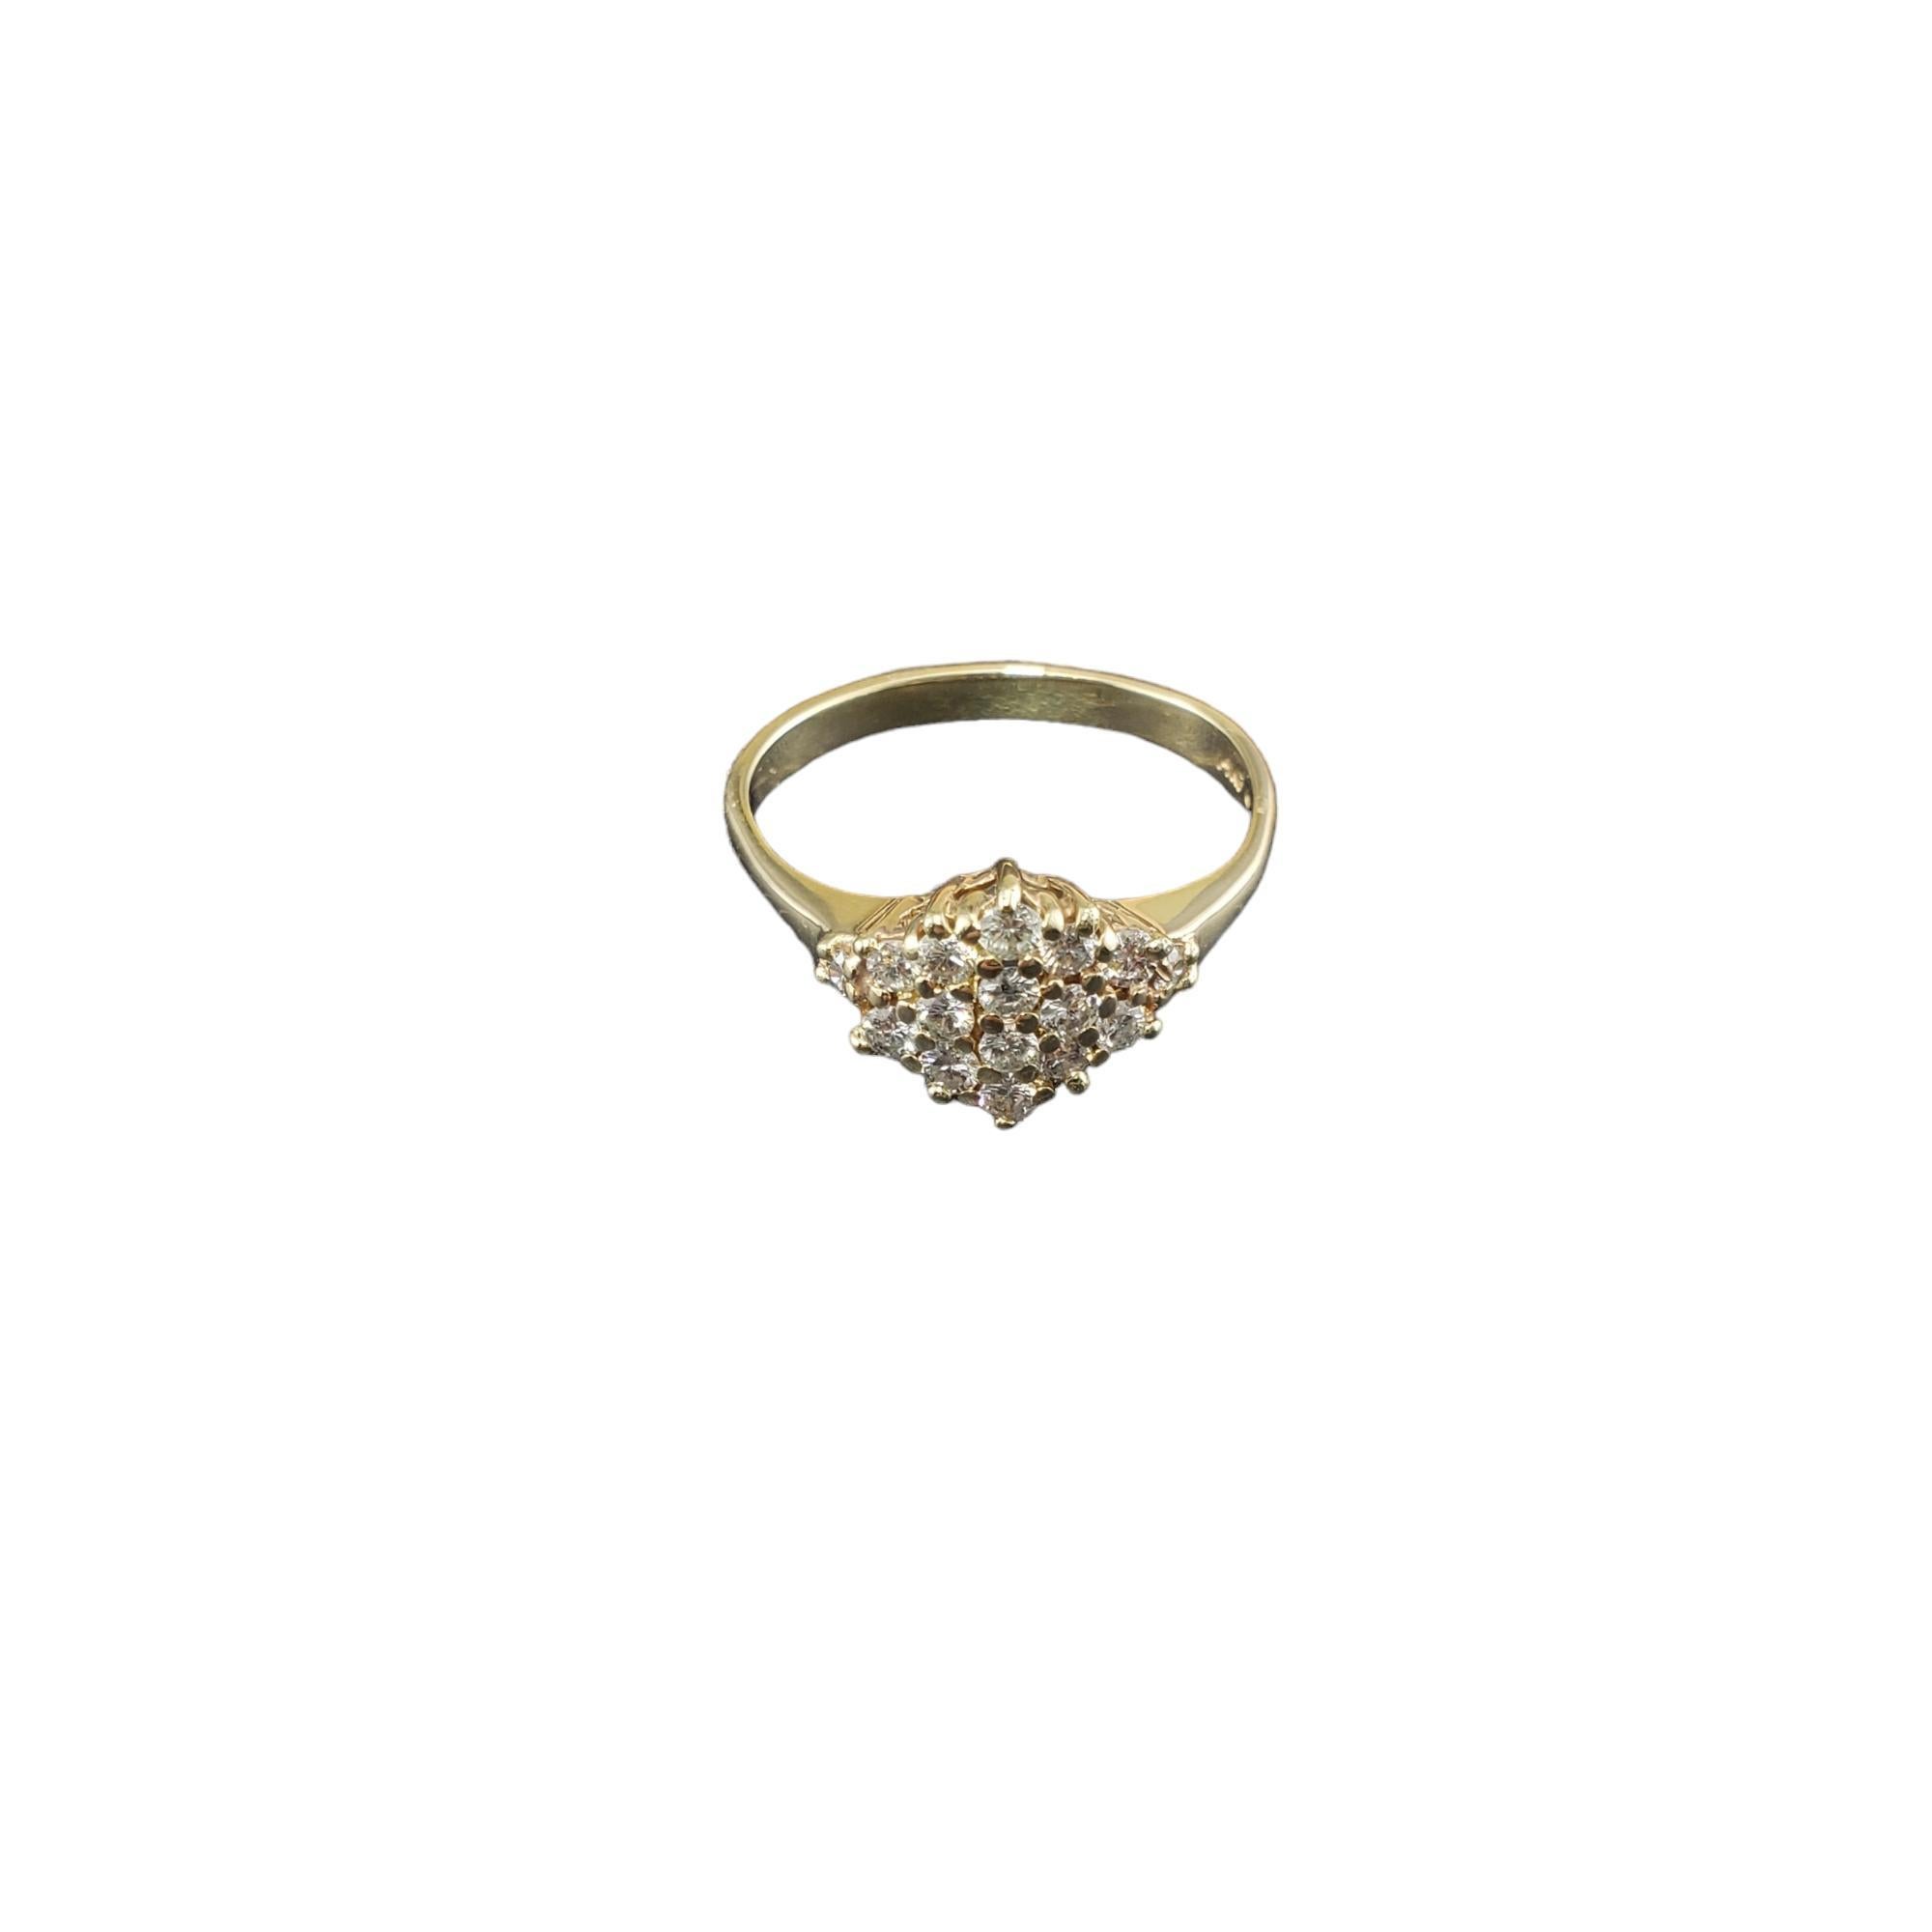 Vintage 14K Yellow Gold and Diamond Ring Size 7.5-

This sparkling ring features 16 round brilliant cut diamonds set in classic 14K yellow gold.  Width: 13 mm.
Shank: 2 mm.

Approximate total diamond weight: .25 ct.

Diamond color: G

Diamond